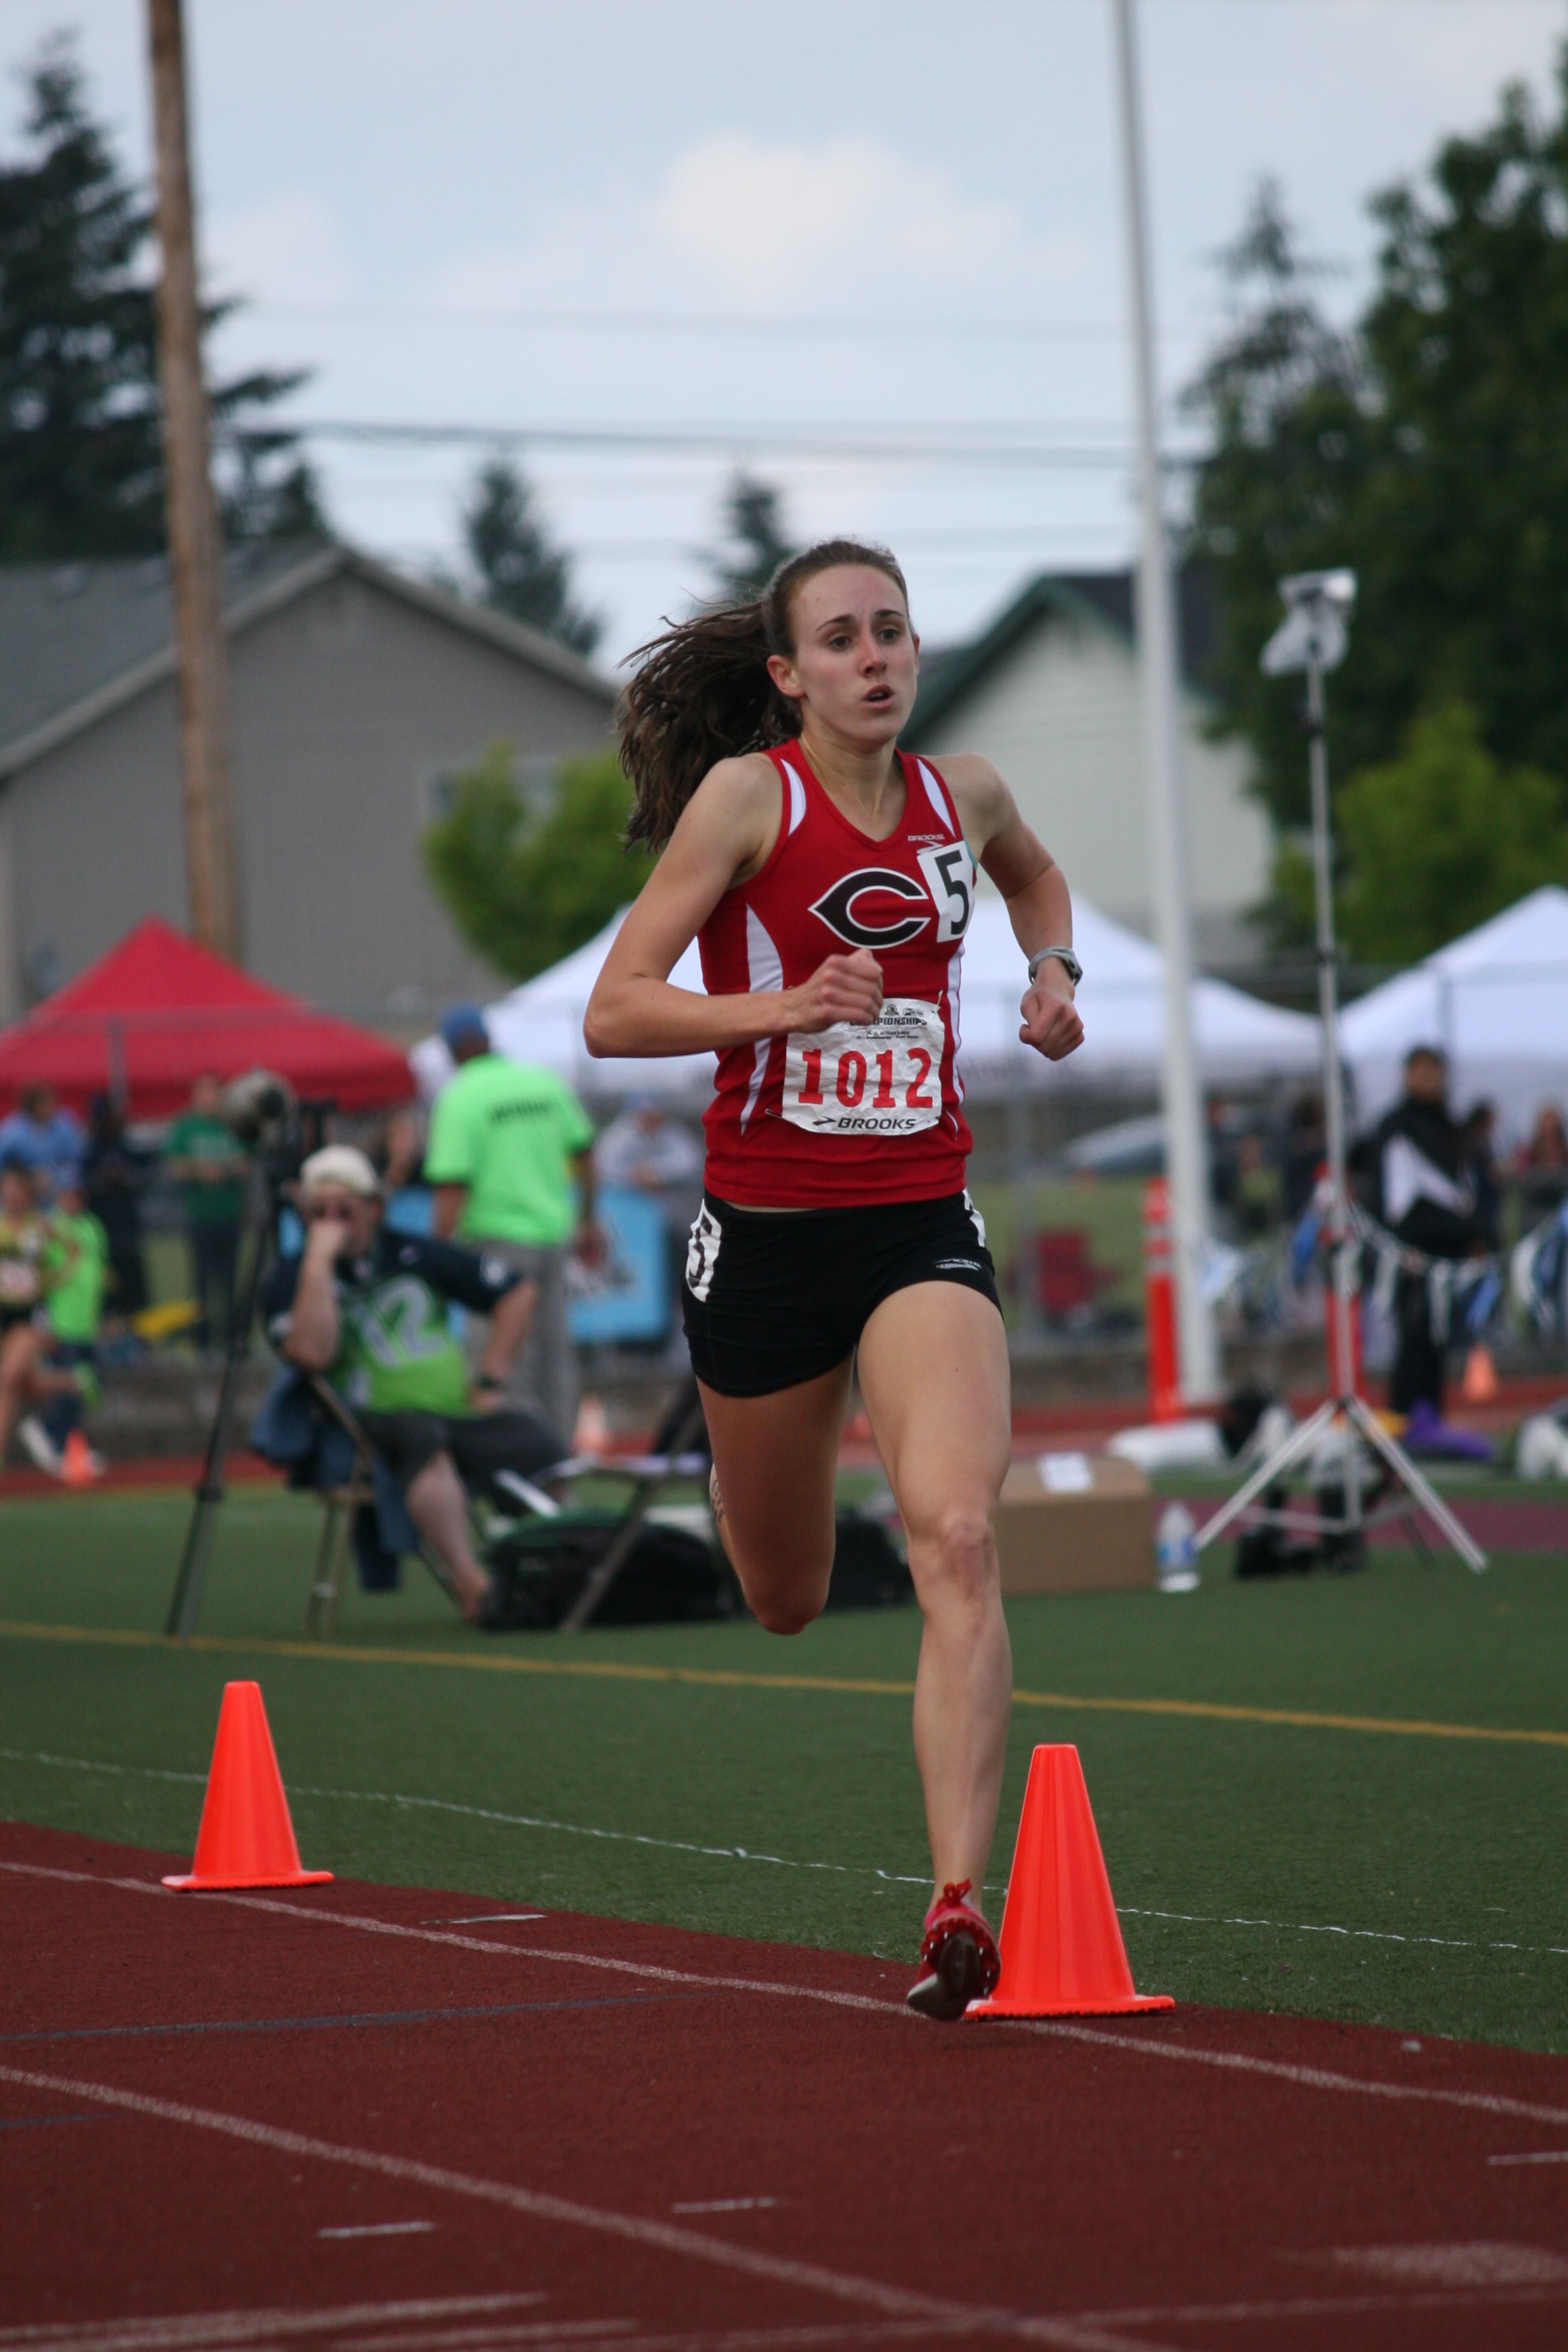 Alexa Efraimson wins the 1,600 state title and sets a new national record time of 4:33.29.